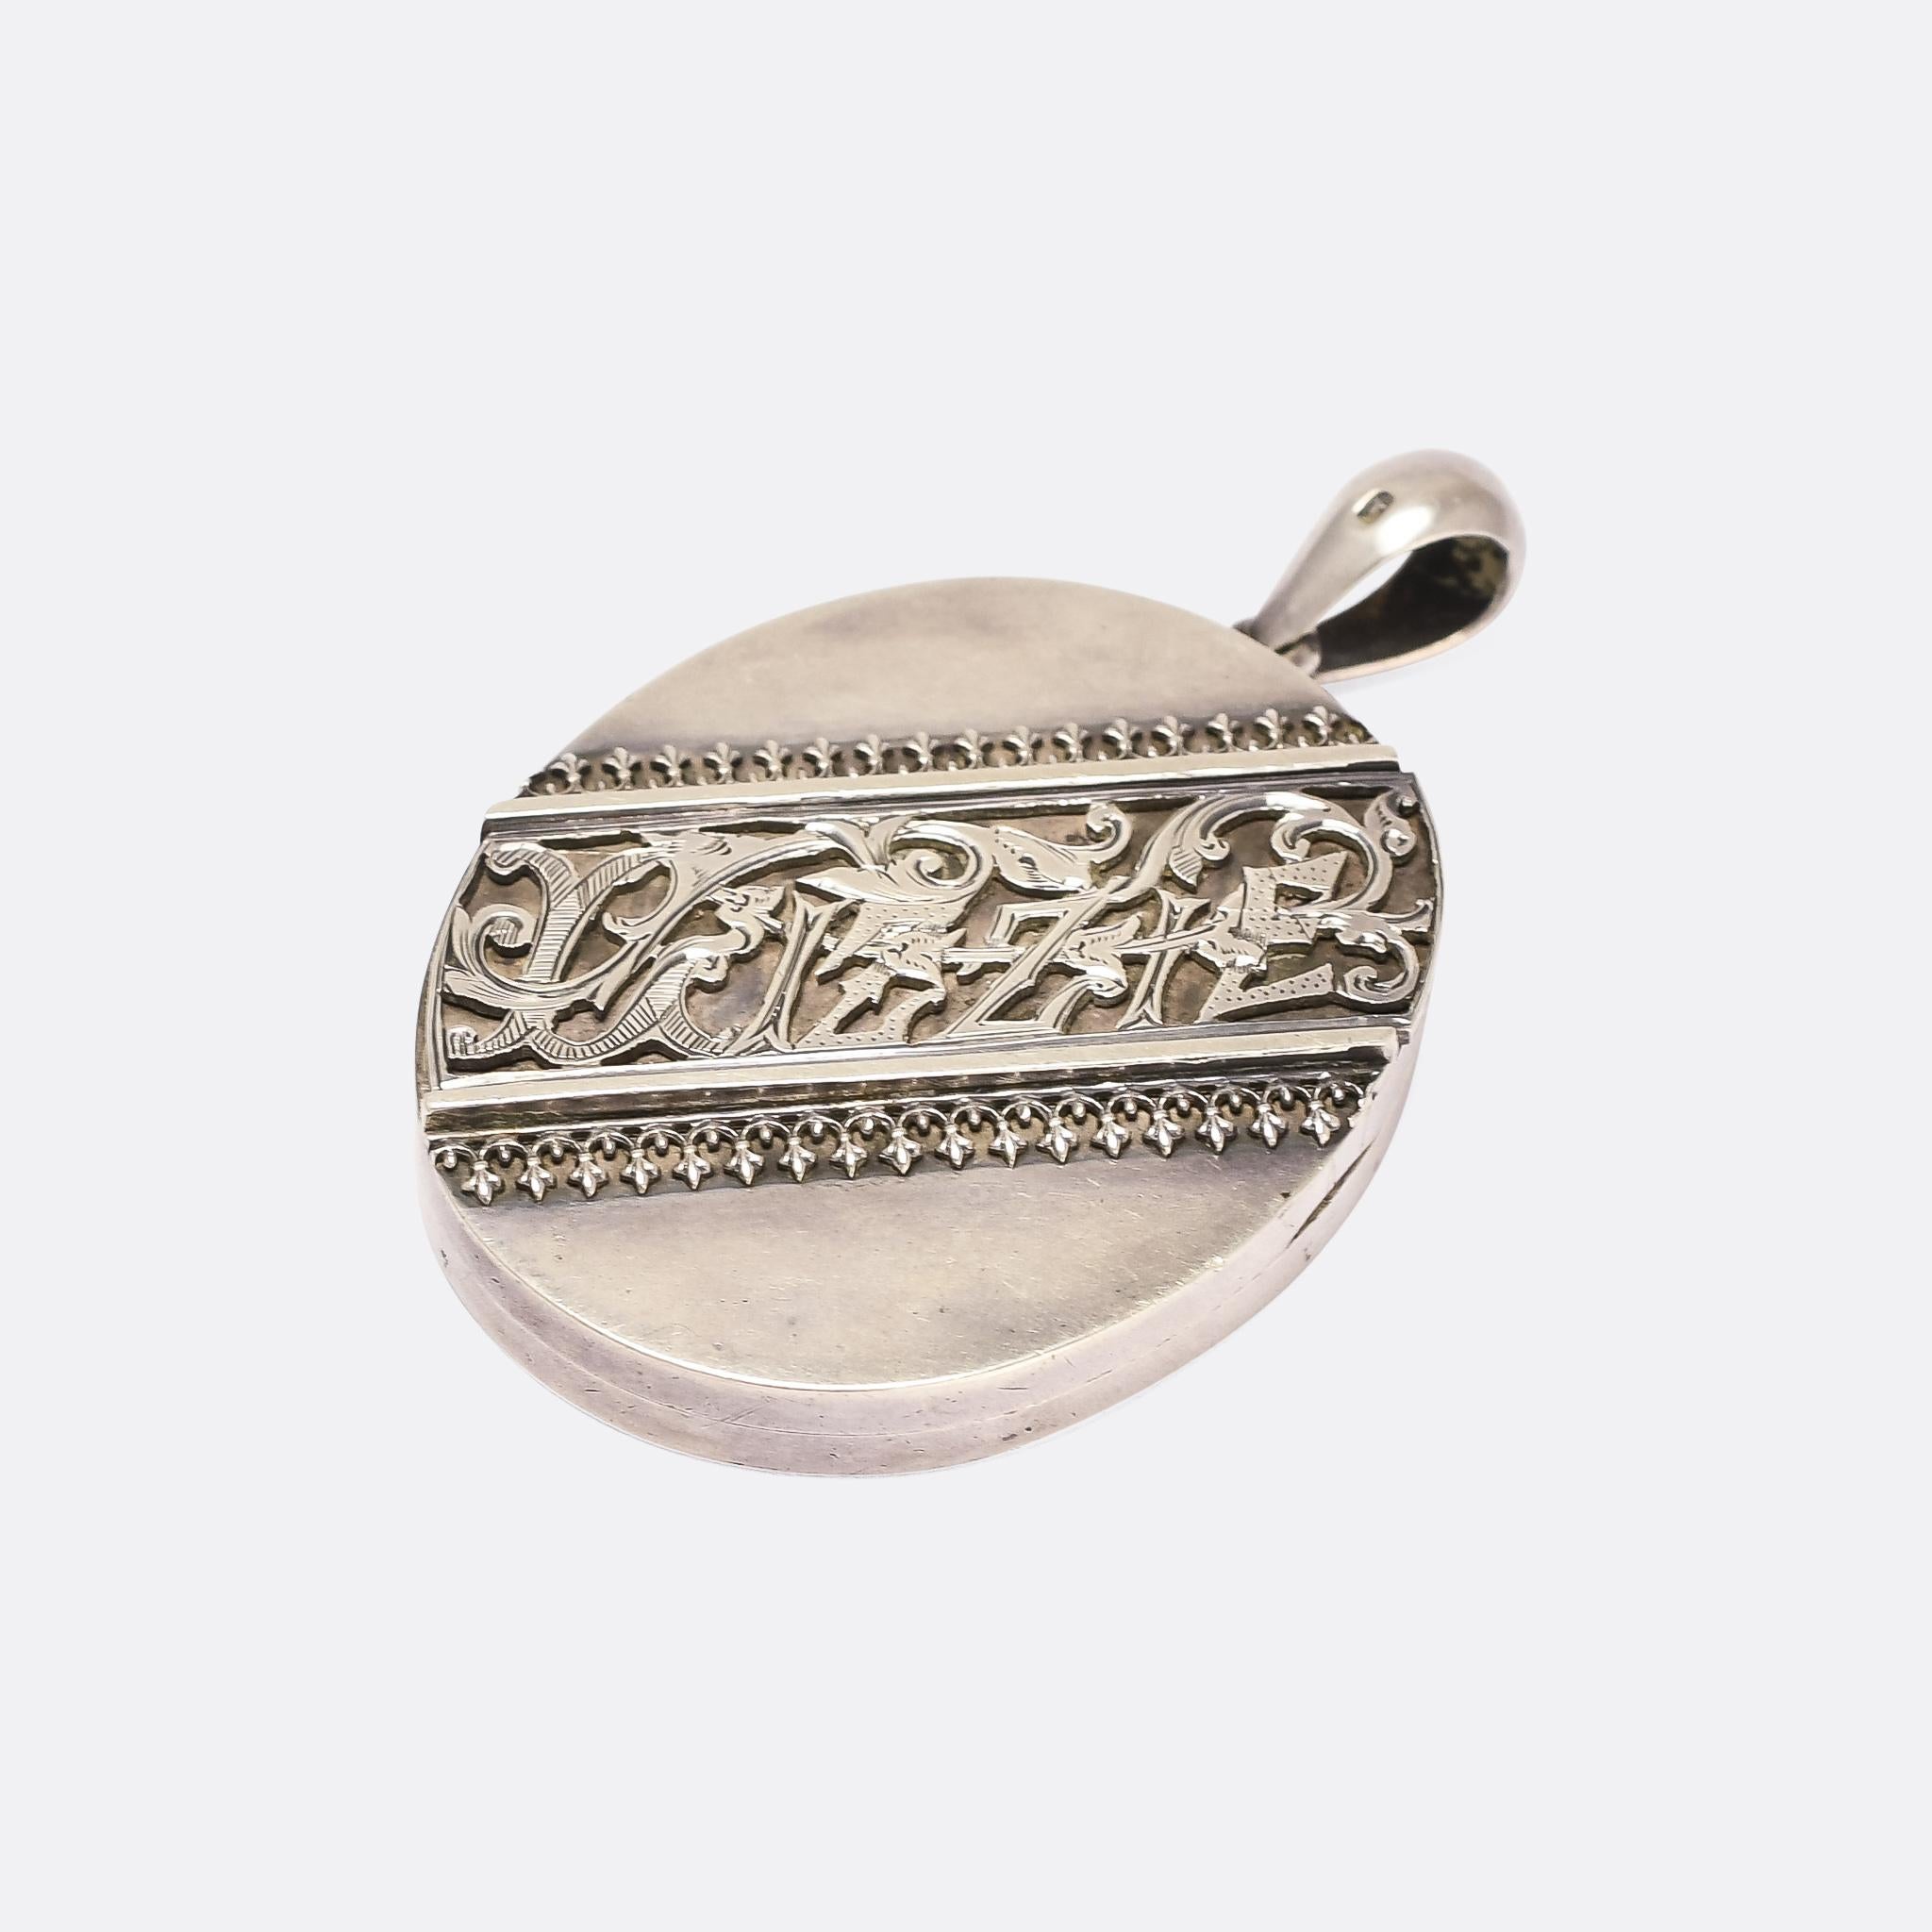 A cool Victorian oval locket with the name Lizzie emblazoned across the front. The lettering is beautifully worked, and decorated with rococo style acanthus leaves. It's crafted in sterling silver, with clear Birmingham hallmarks dating it to the